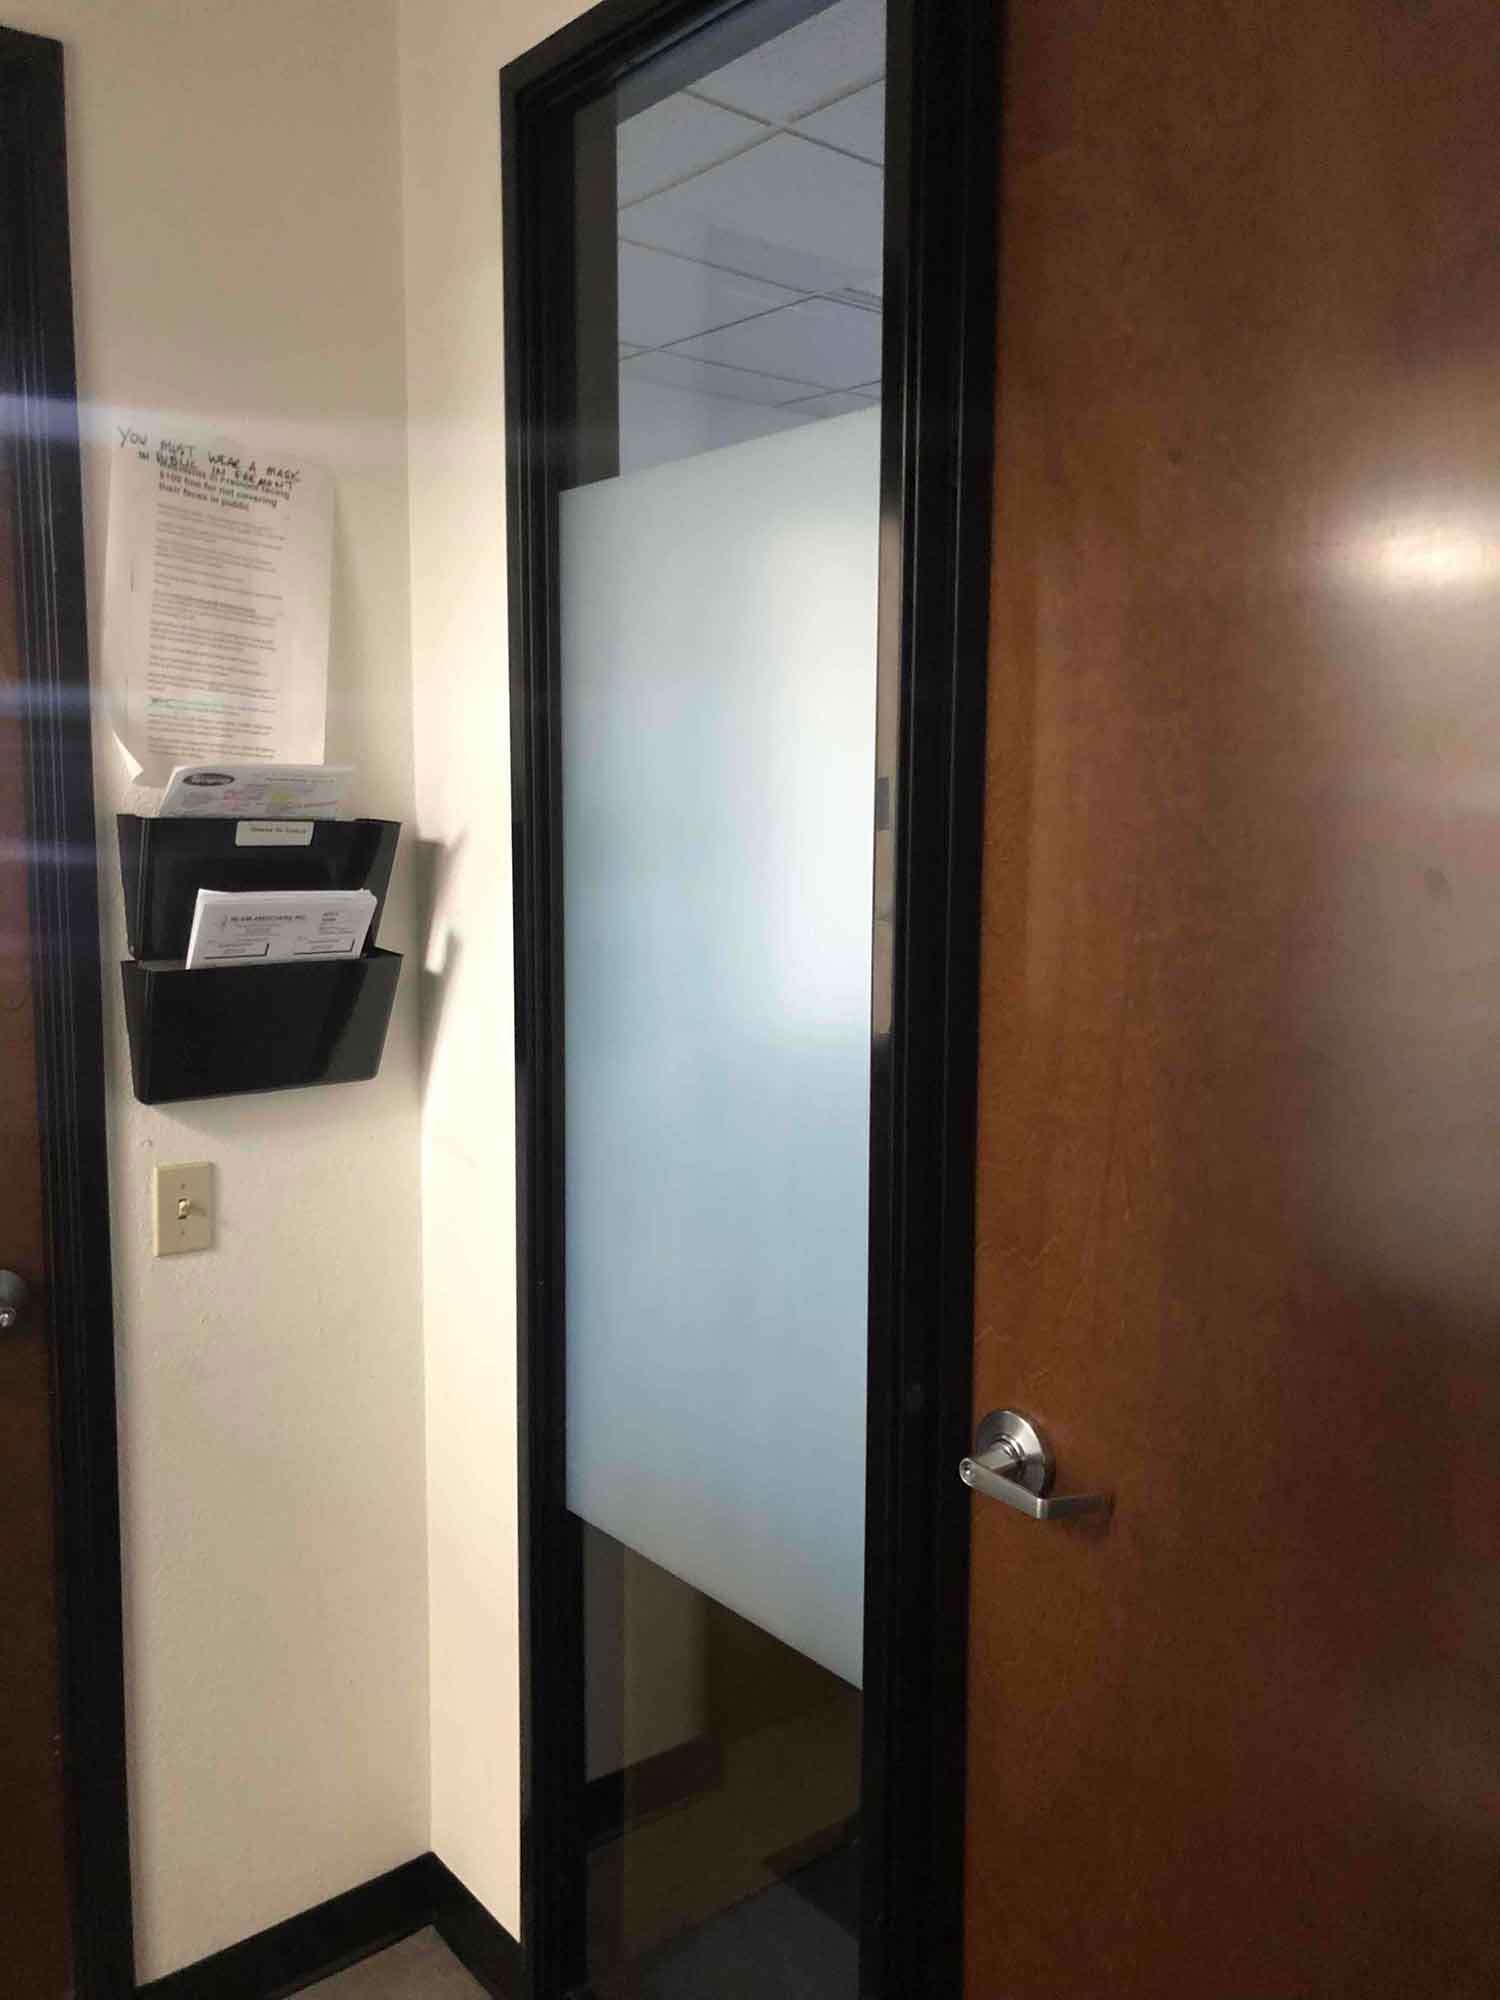 A Fremont, CA Office Gets More Privacy with Frosted Window Tint by ClimatePro